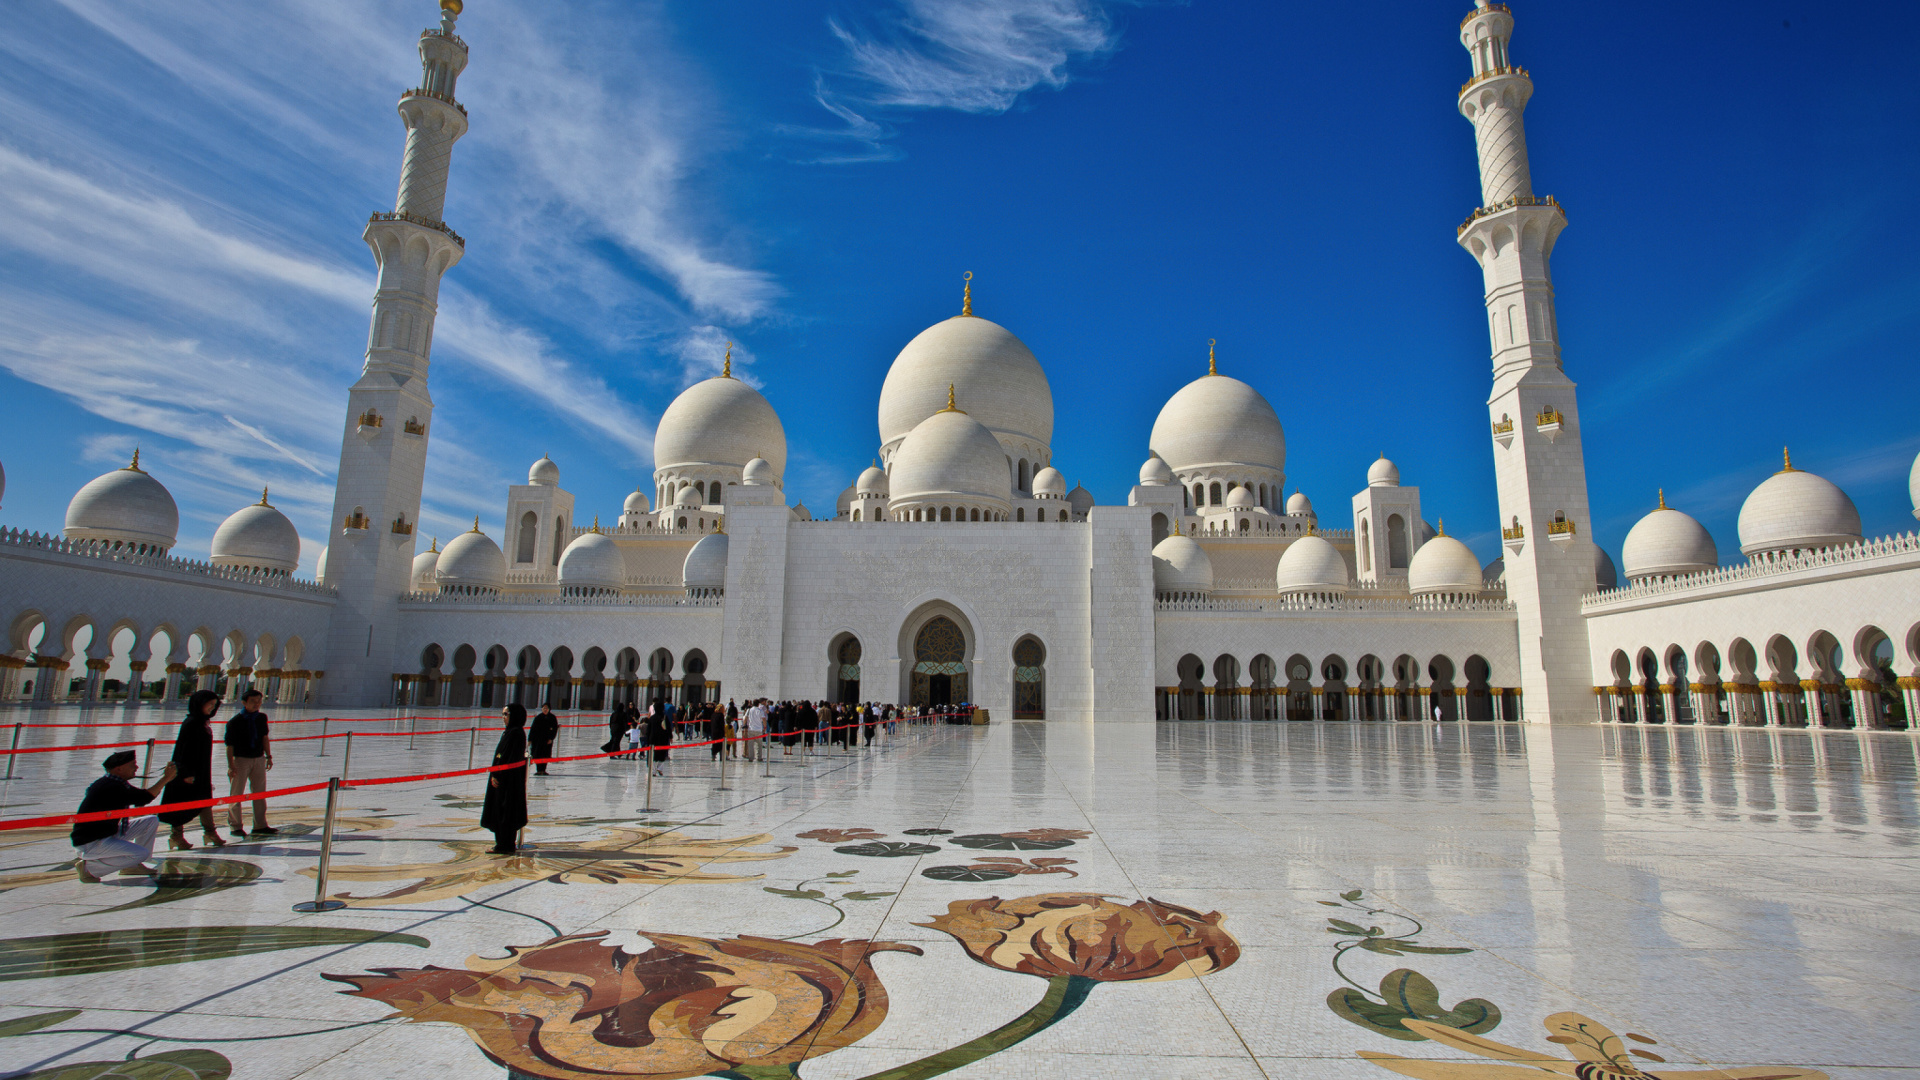 Sheikh Zayed Mosque located in Abu Dhabi wallpaper 1920x1080